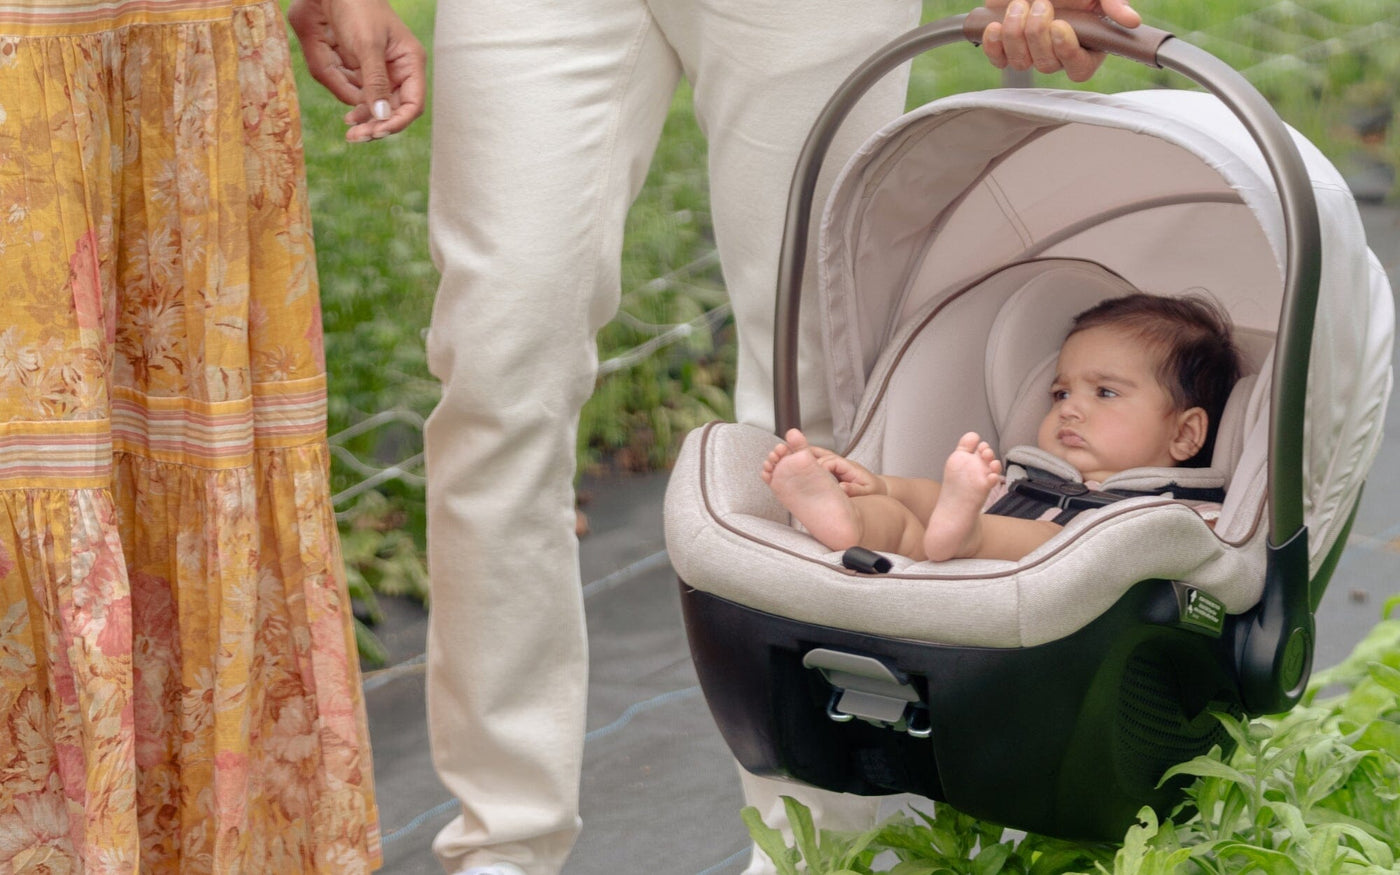 Strollers Compatible with Maxi-Cosi Peri Series Infant Car Seats